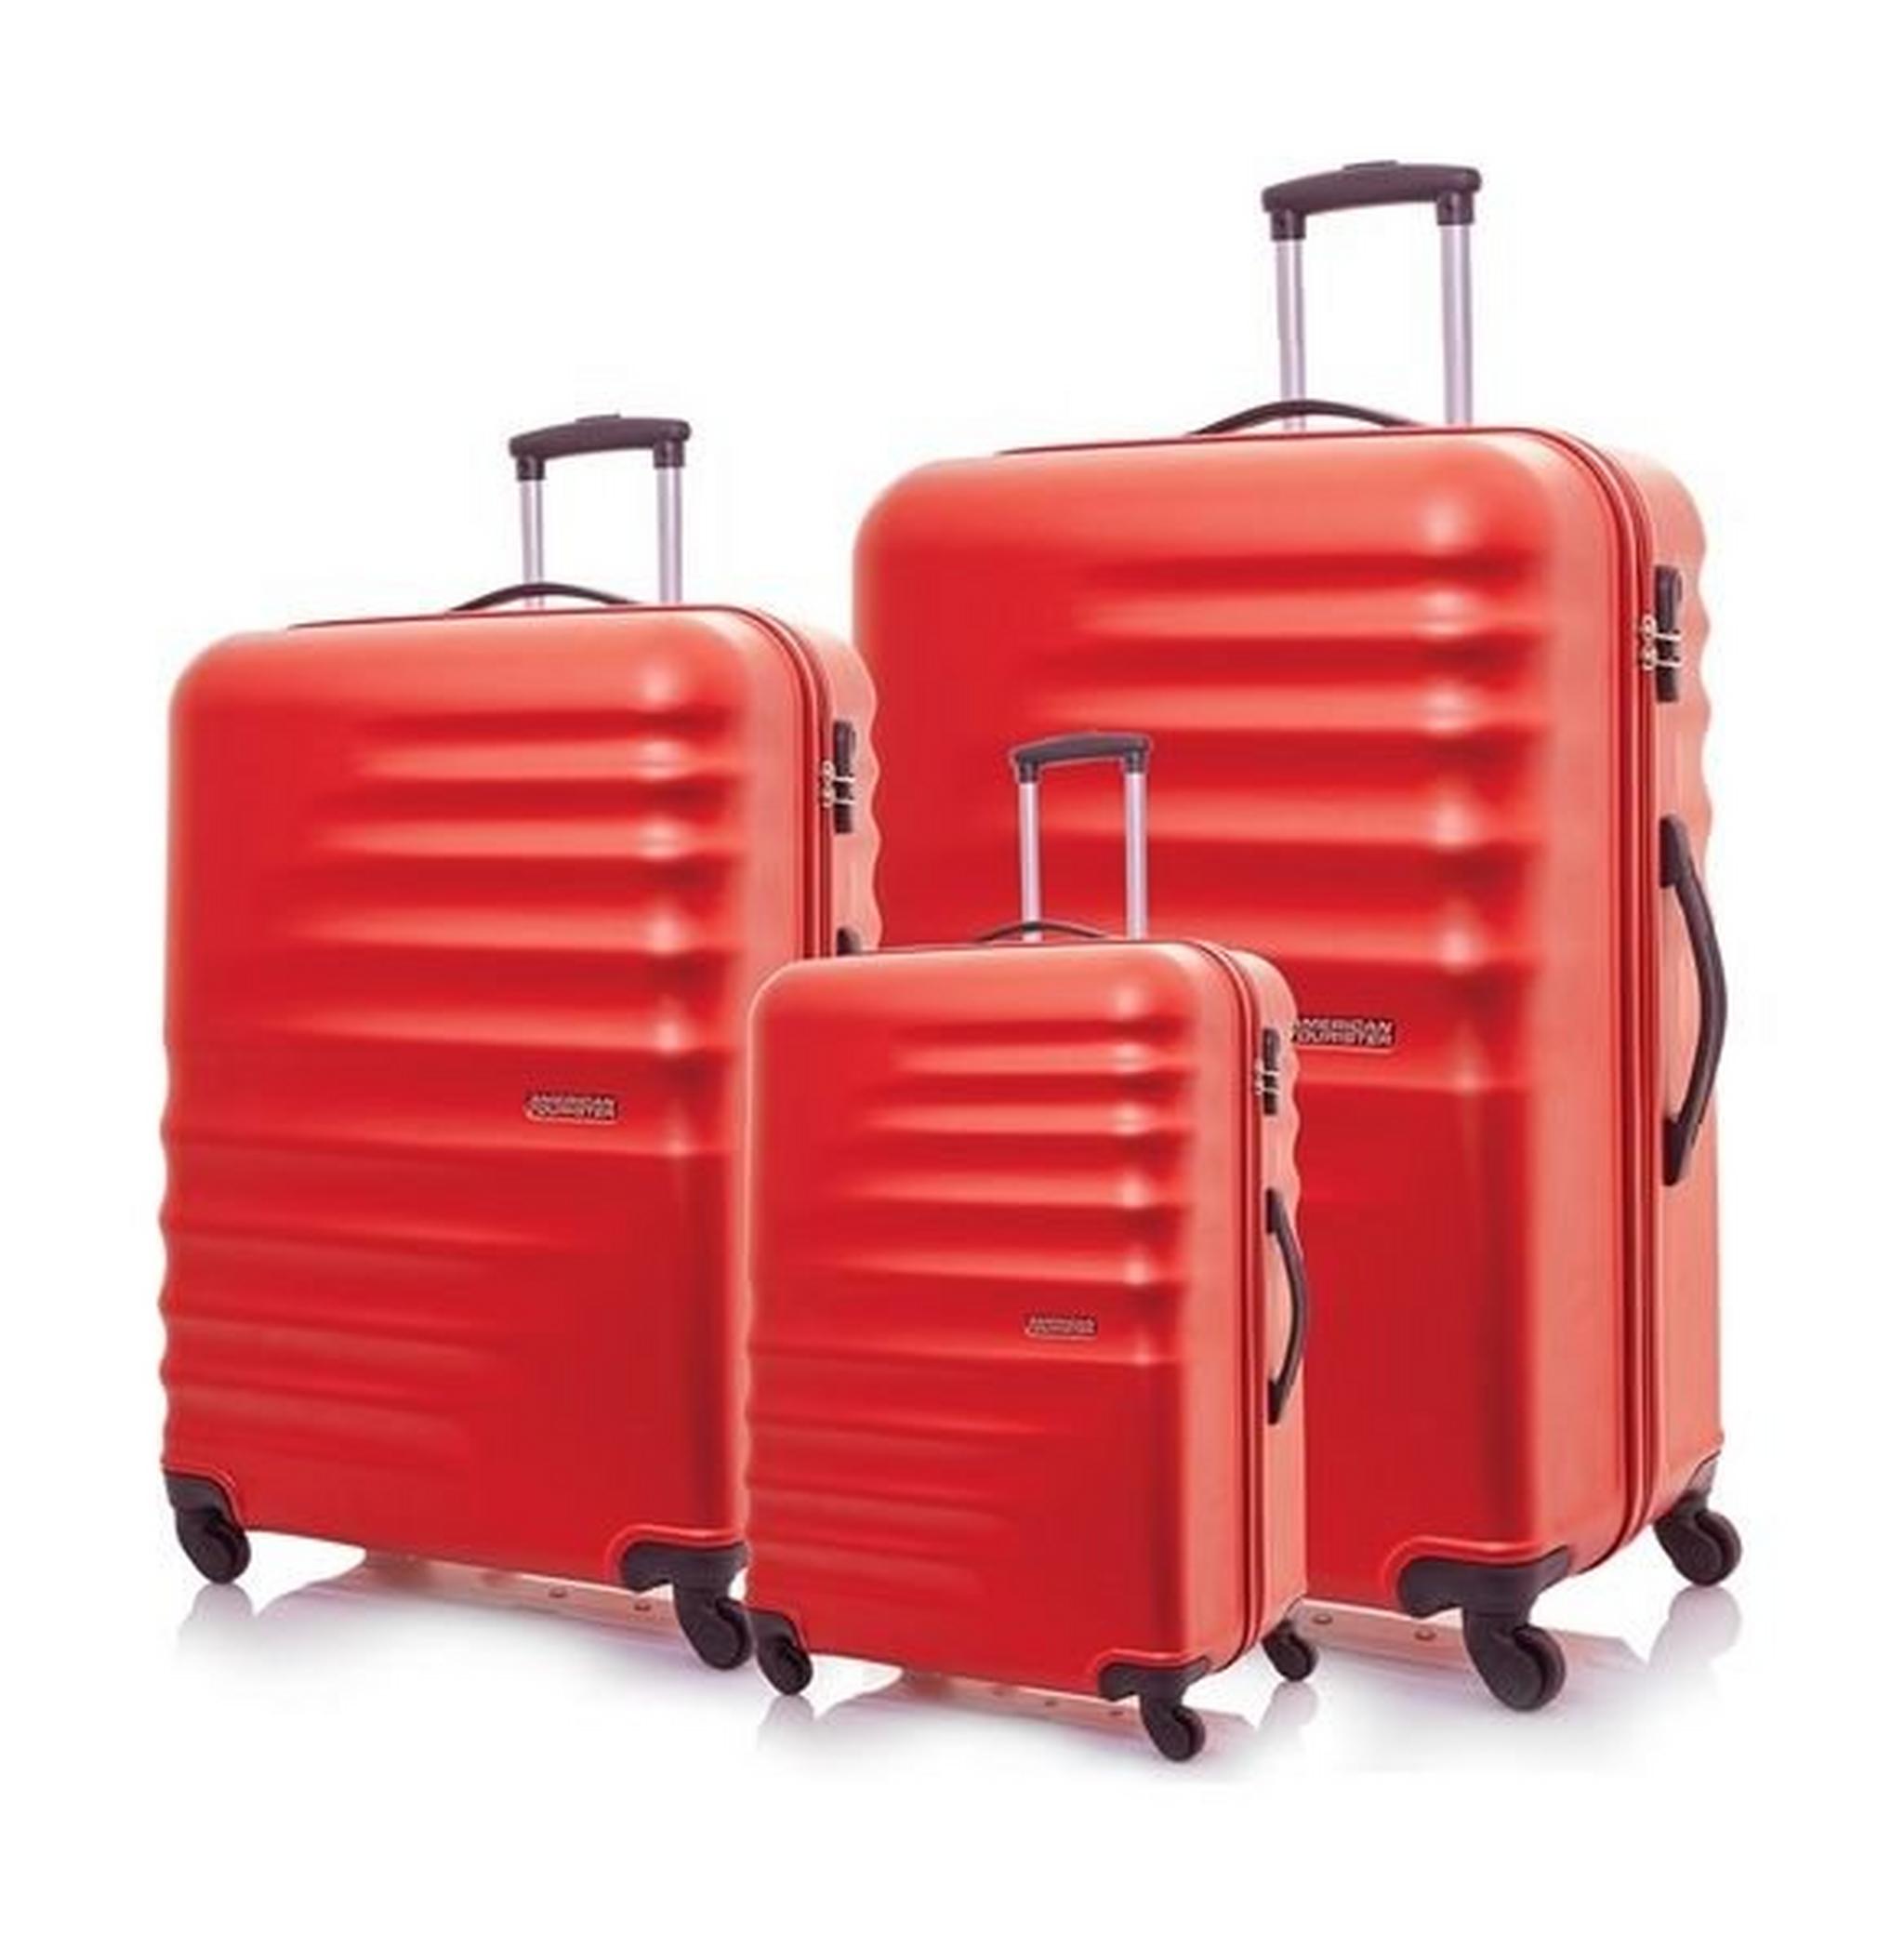 American Tourister Preston Hard Trolley Luggage Set of 3 (55+67+77cm) -Red